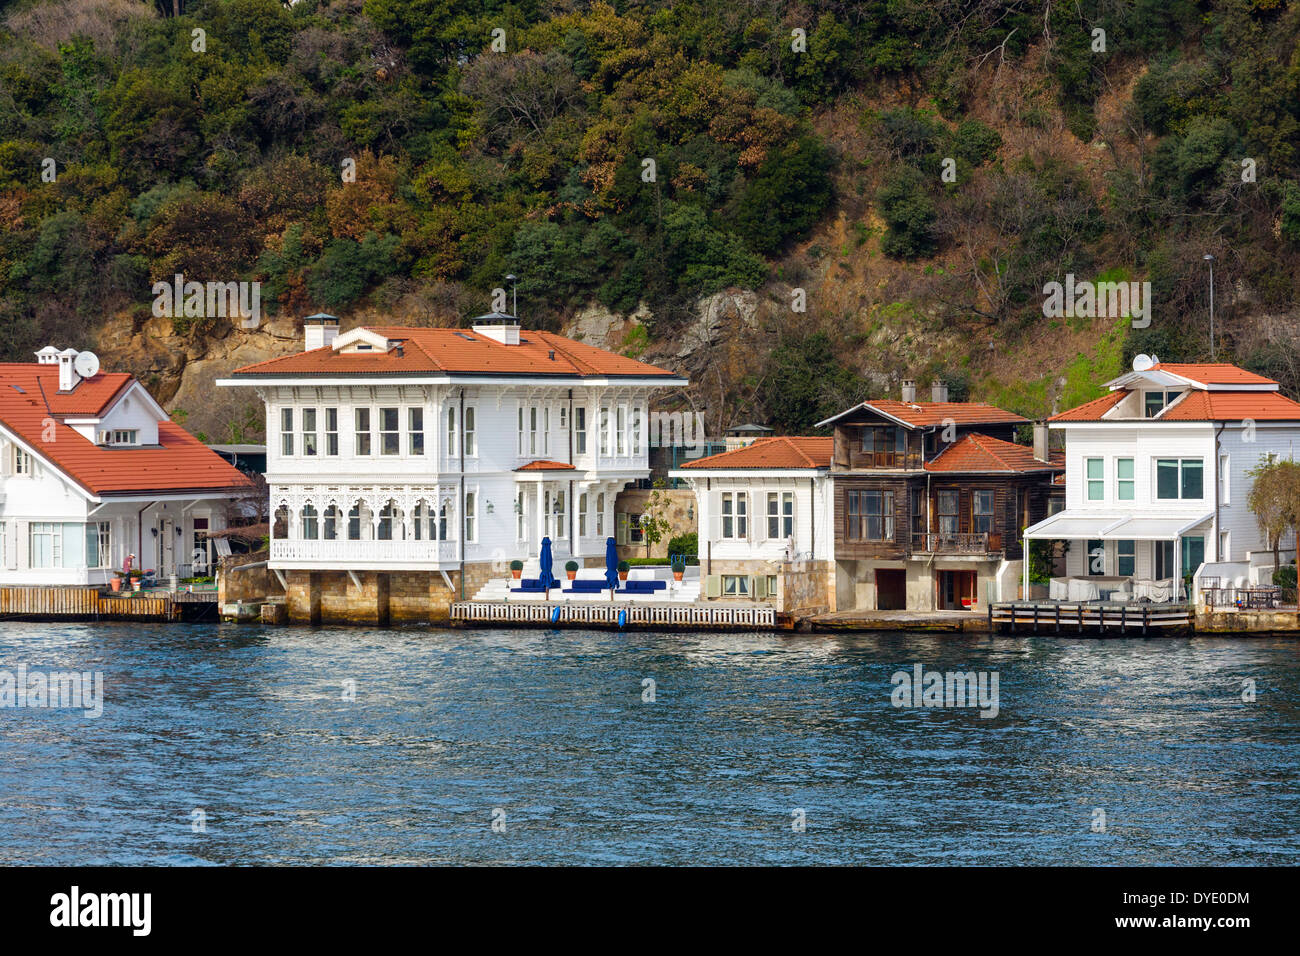 Yalis (exclusive waterfront mansions) along the Asian shore of the Bosphorus viewed from Bosphorus cruise boat, Istanbul, Turkey Stock Photo